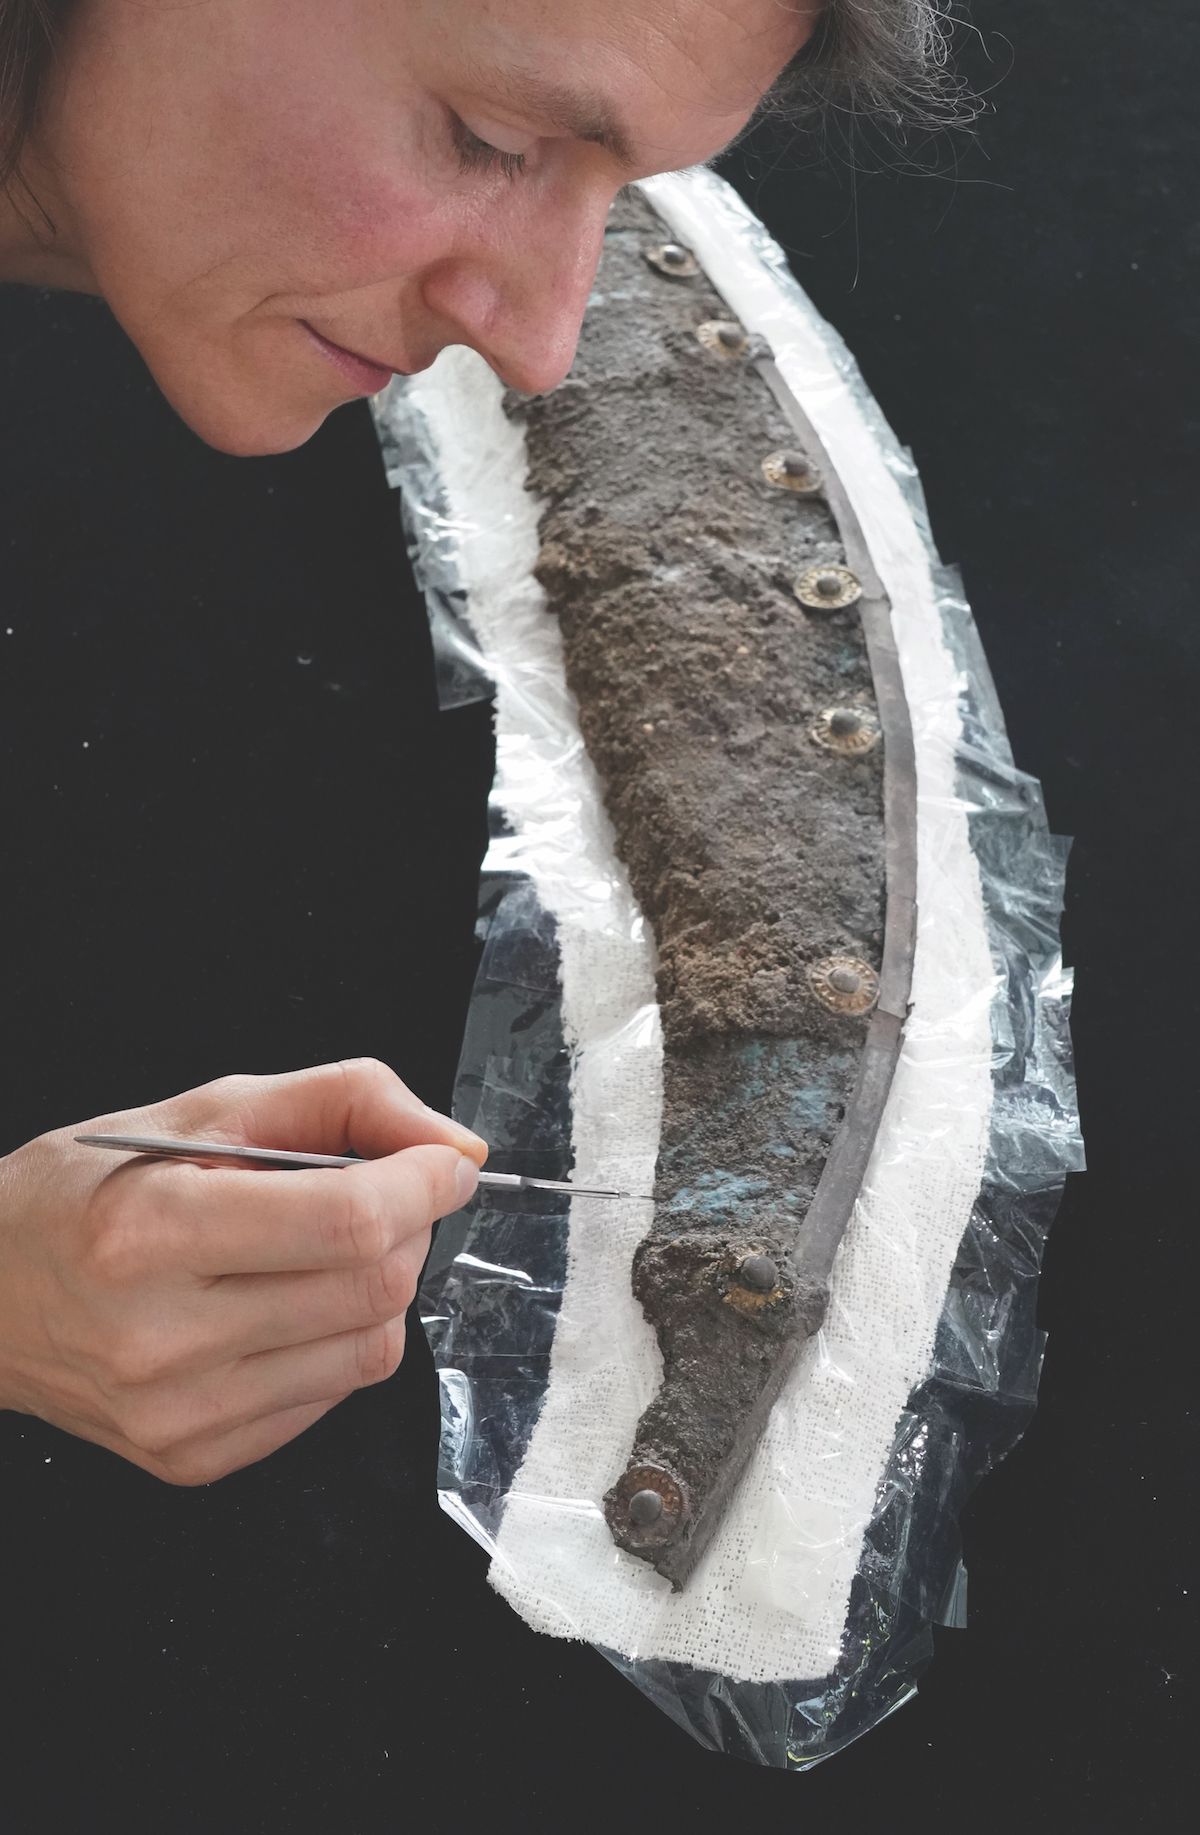 Restorers discover shield fragment is 1,700 years old, making it